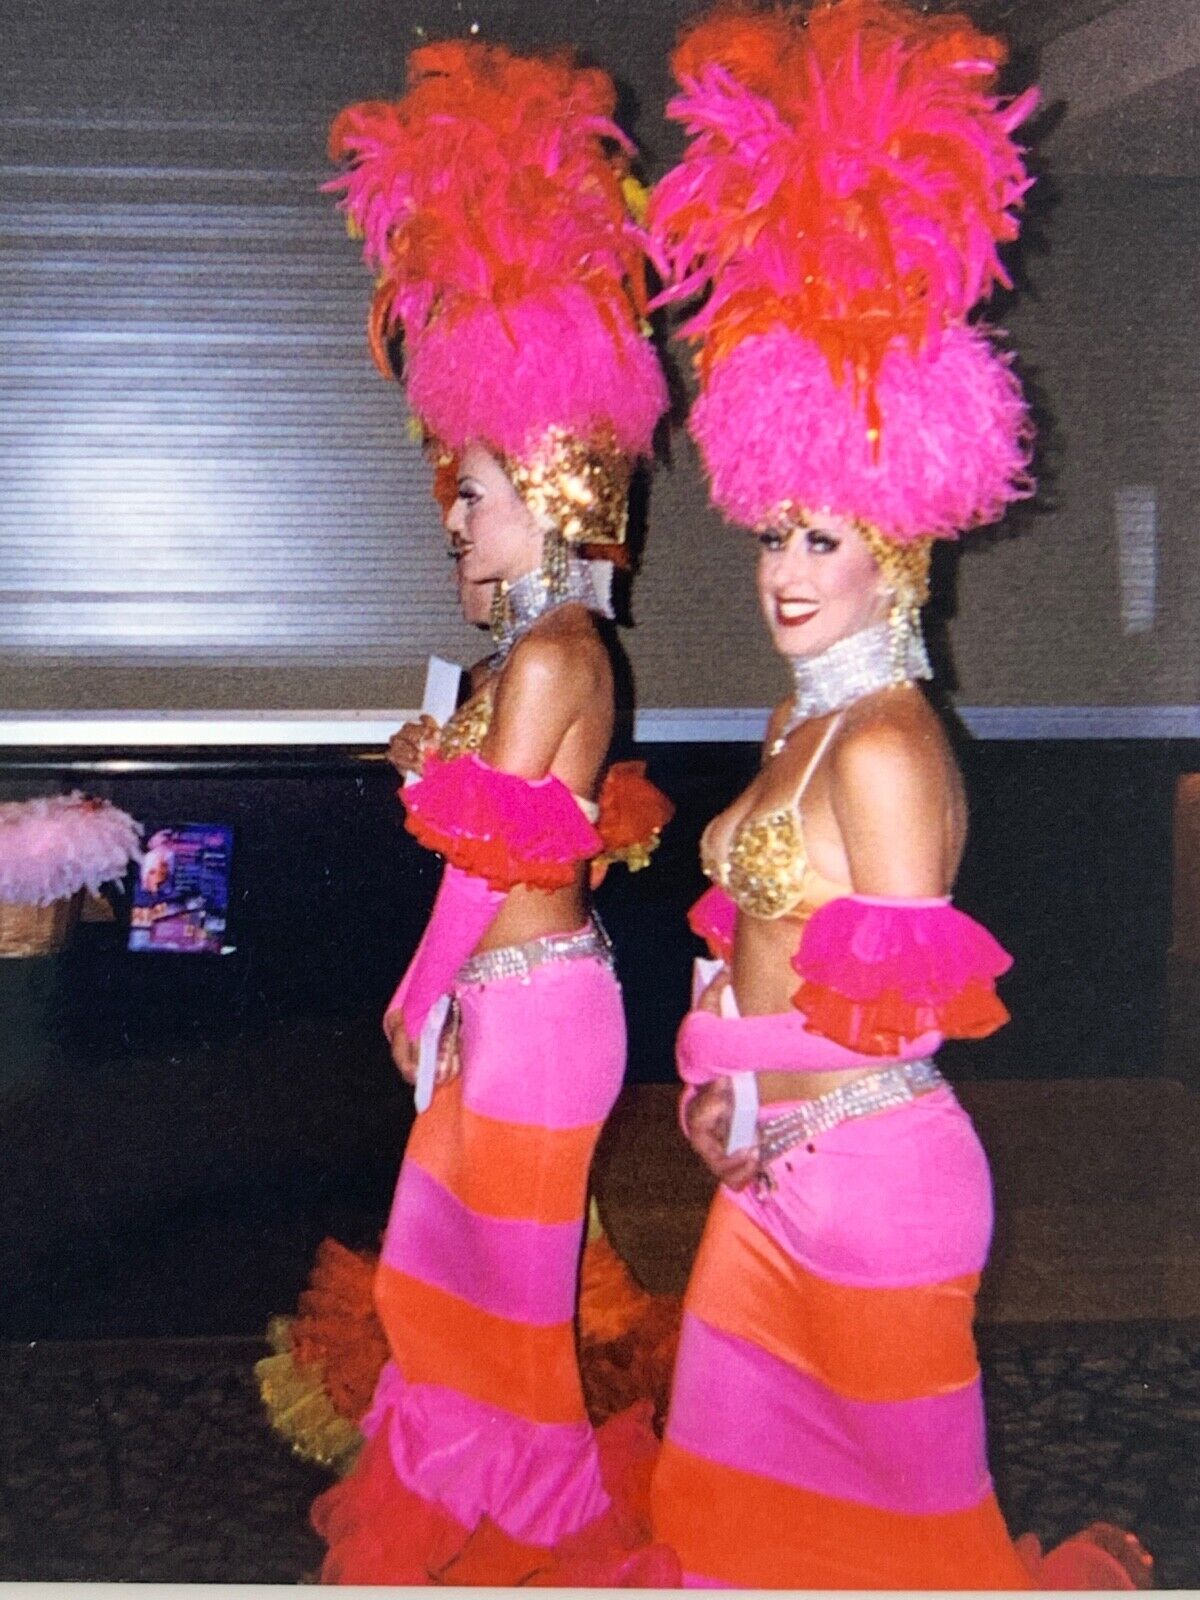 (Kd) FOUND PHOTO Photograph 4x6 Color Las Vegas Feathered Costumes Women